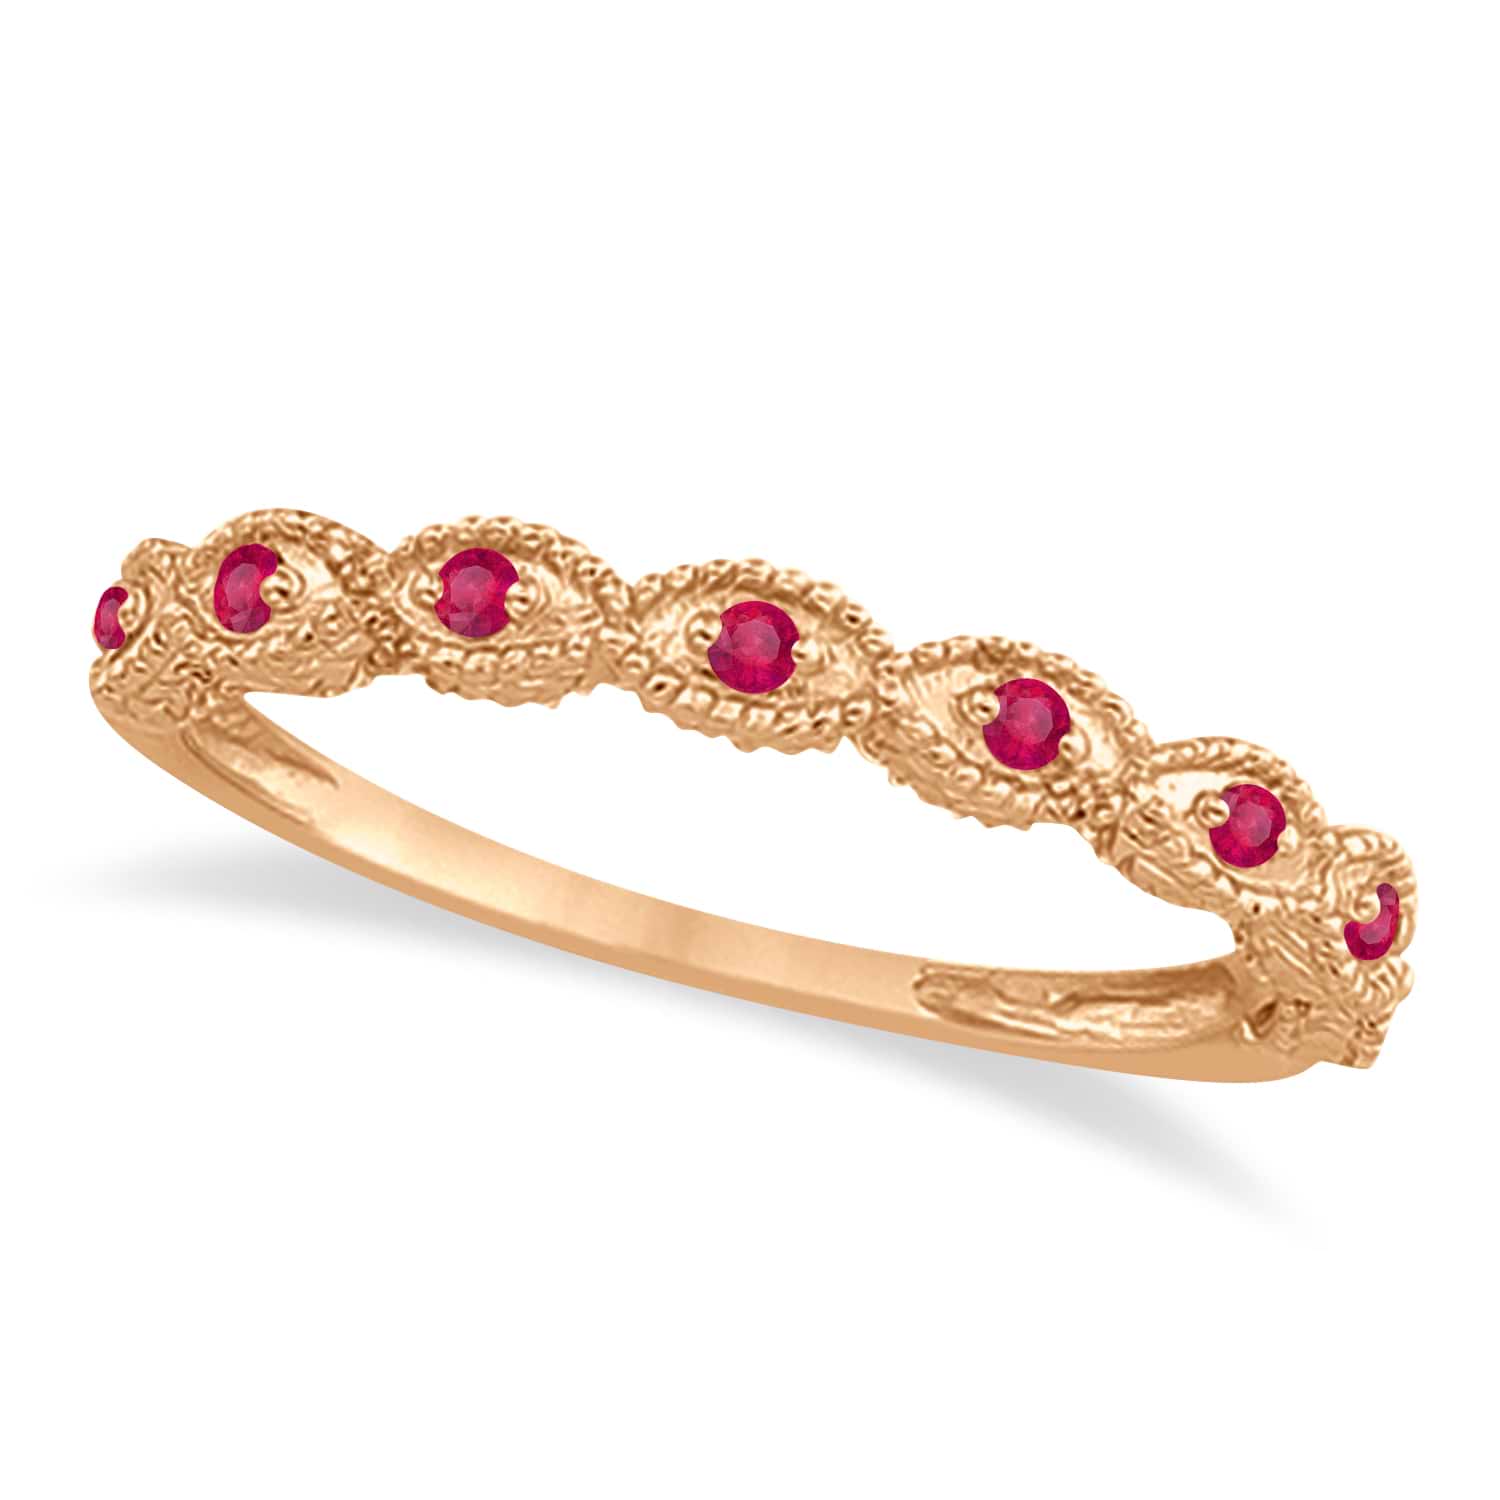 Antique Marquise Shape Ruby Wedding Ring 18k Rose Gold (0.18ct)